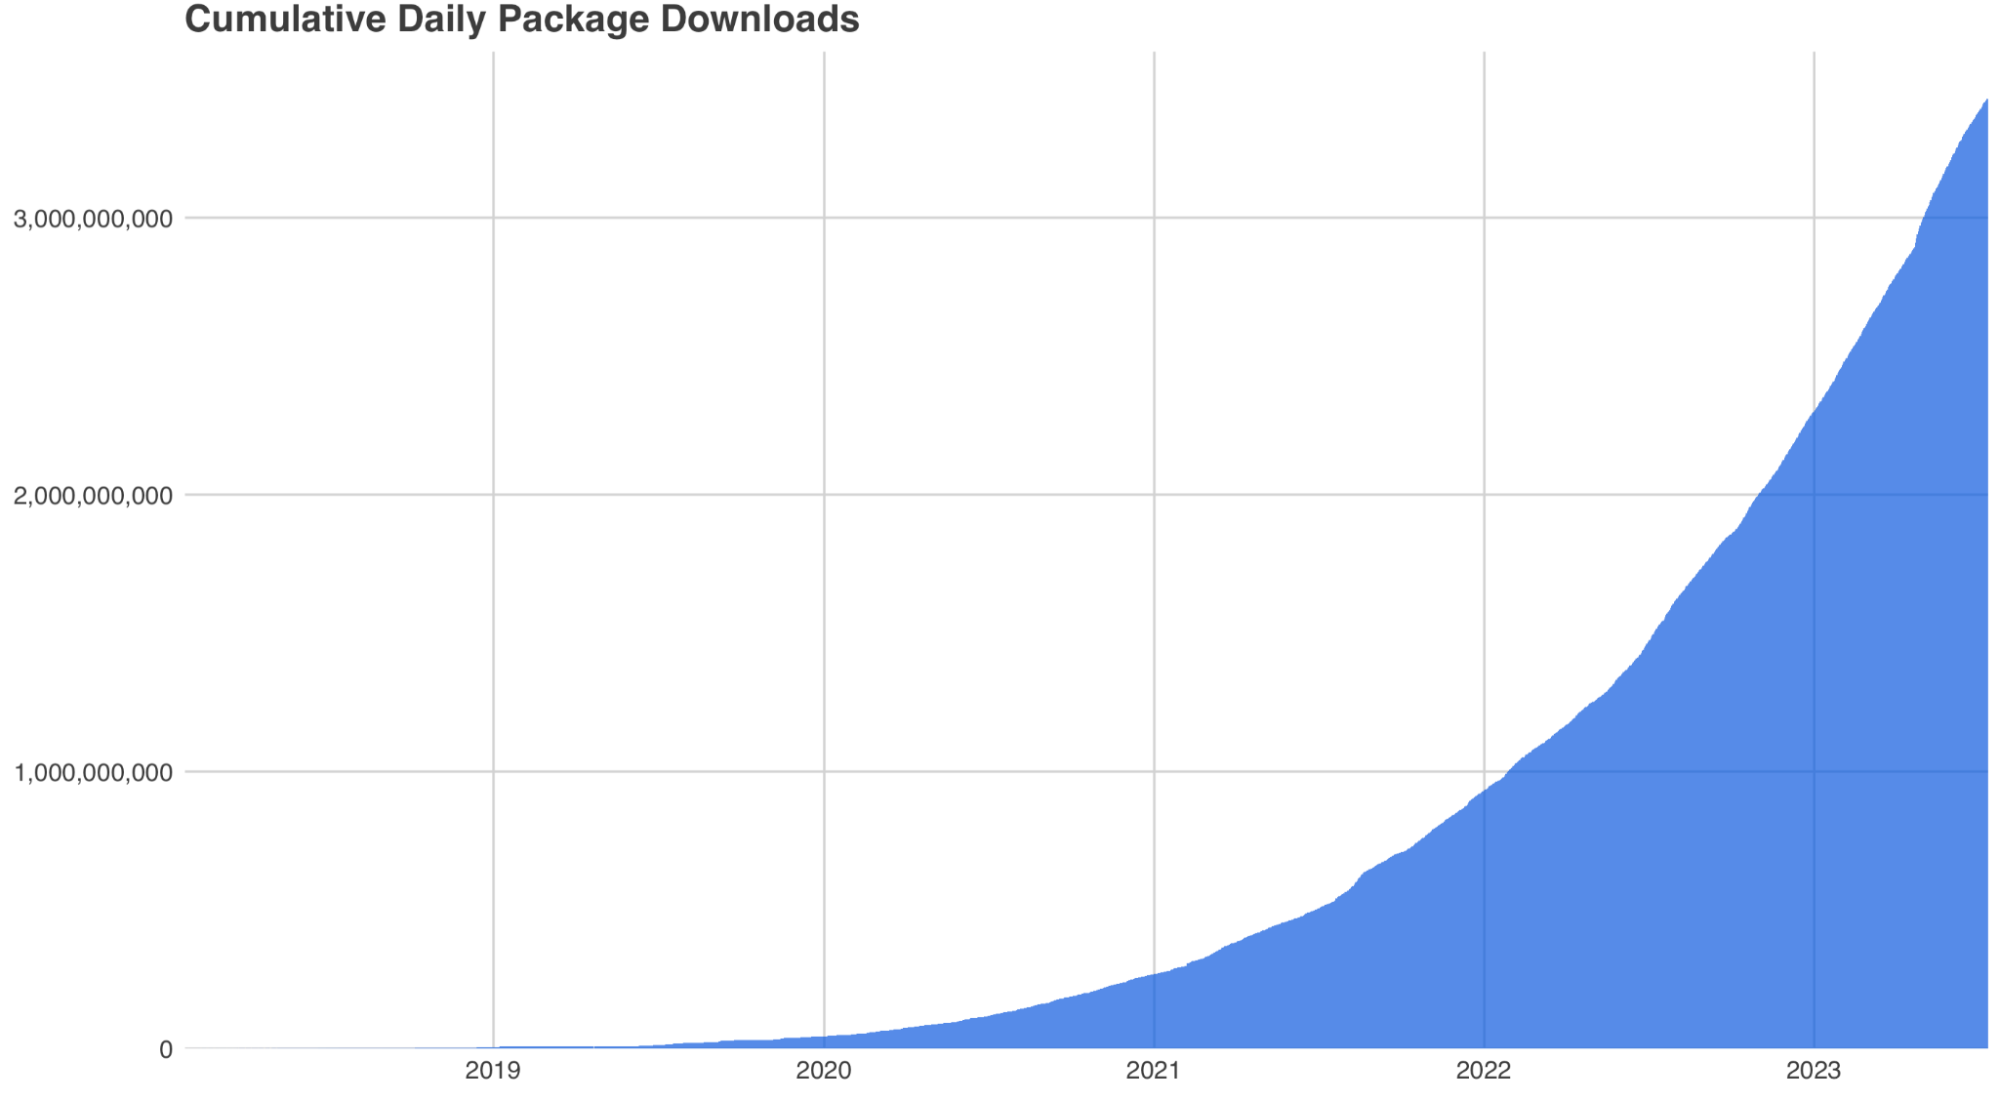 Cumulative daily package downloads from 2019 to 2023 line graph. Starts from around 0 in 2019 to 3 billion in 2023.